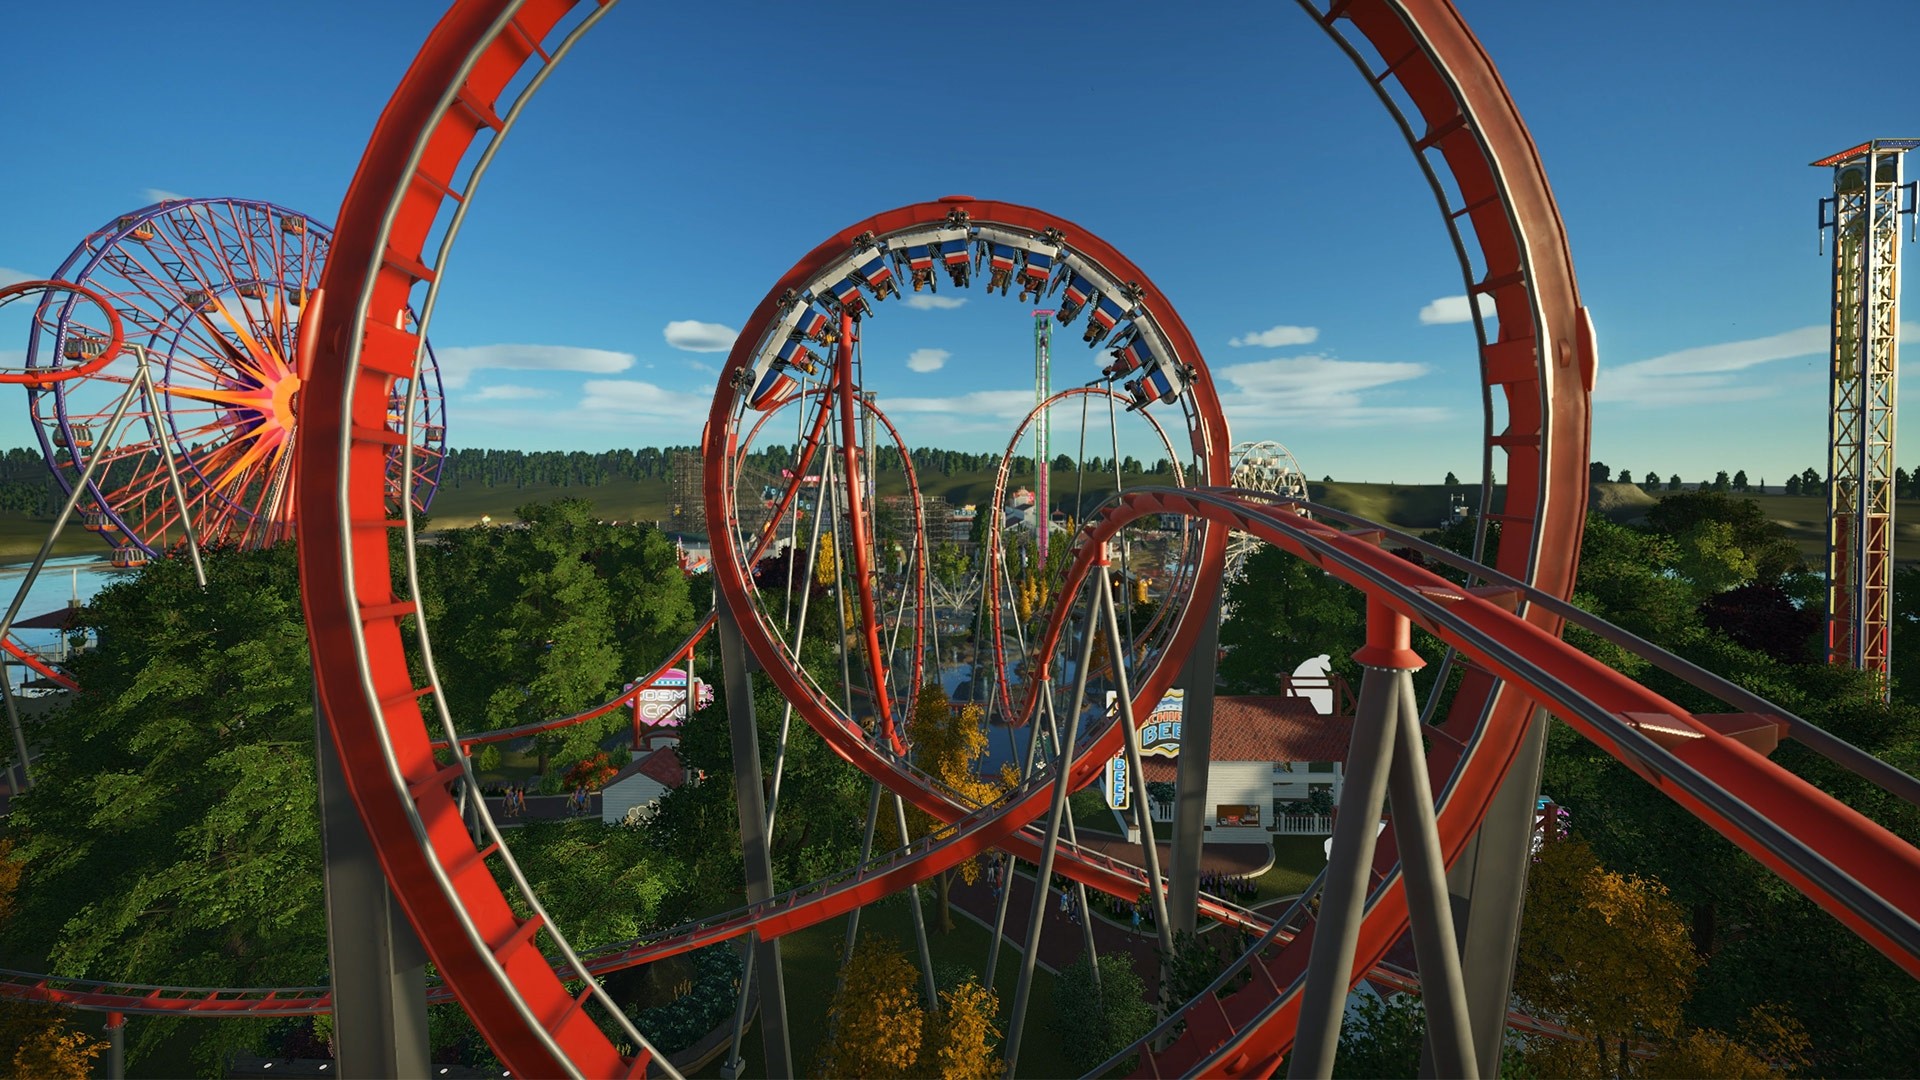 planet roller coaster download free